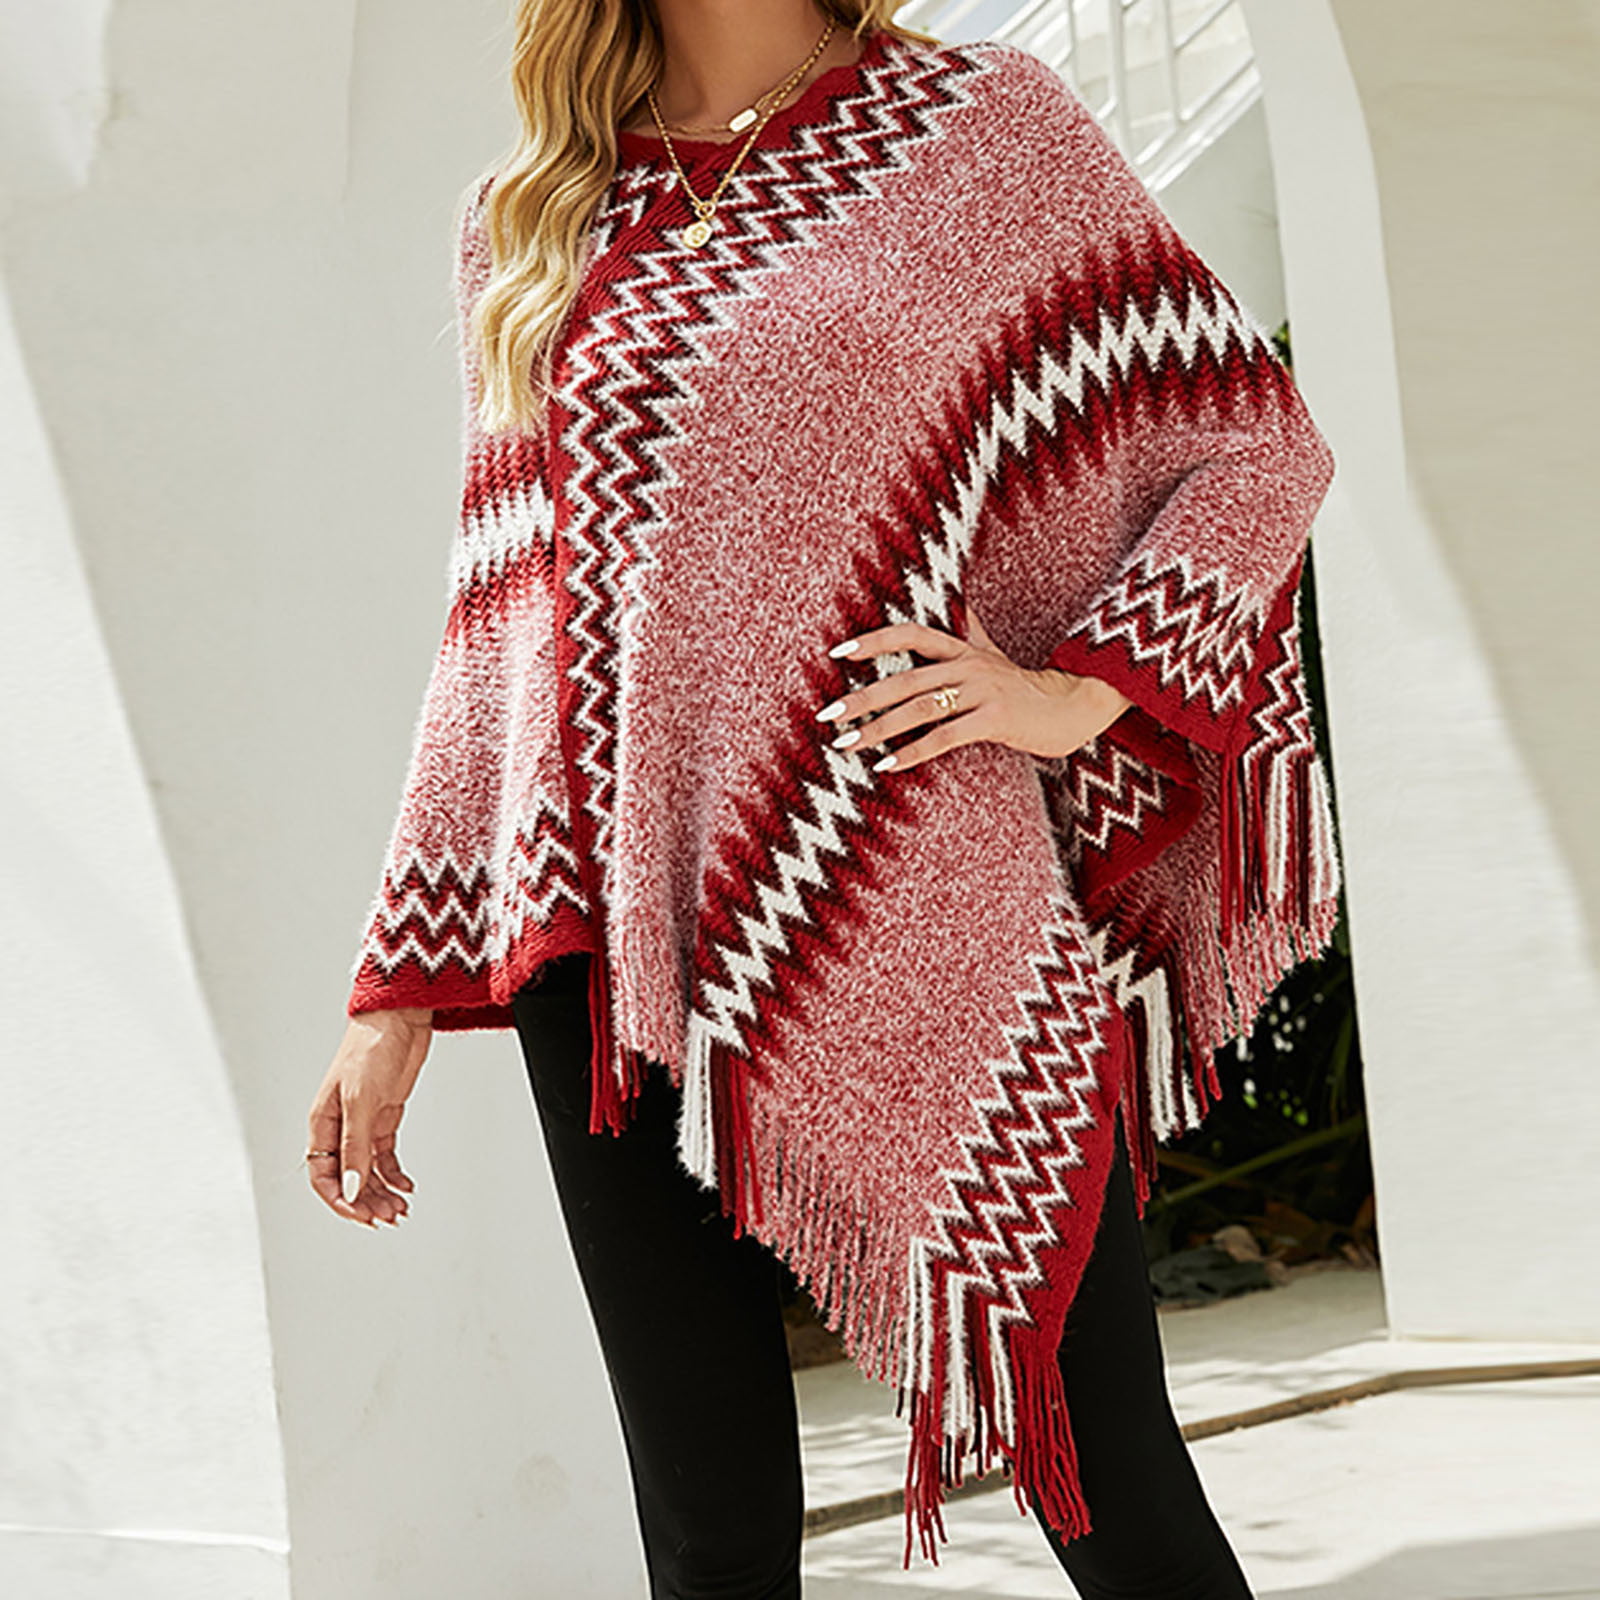 Hfyihgf Women's Elegant Knitted Shawl Poncho with Fringed V-Neck Striped  Sweater Cardigan Cape Gifts for Women Mom Red One Size - Walmart.com